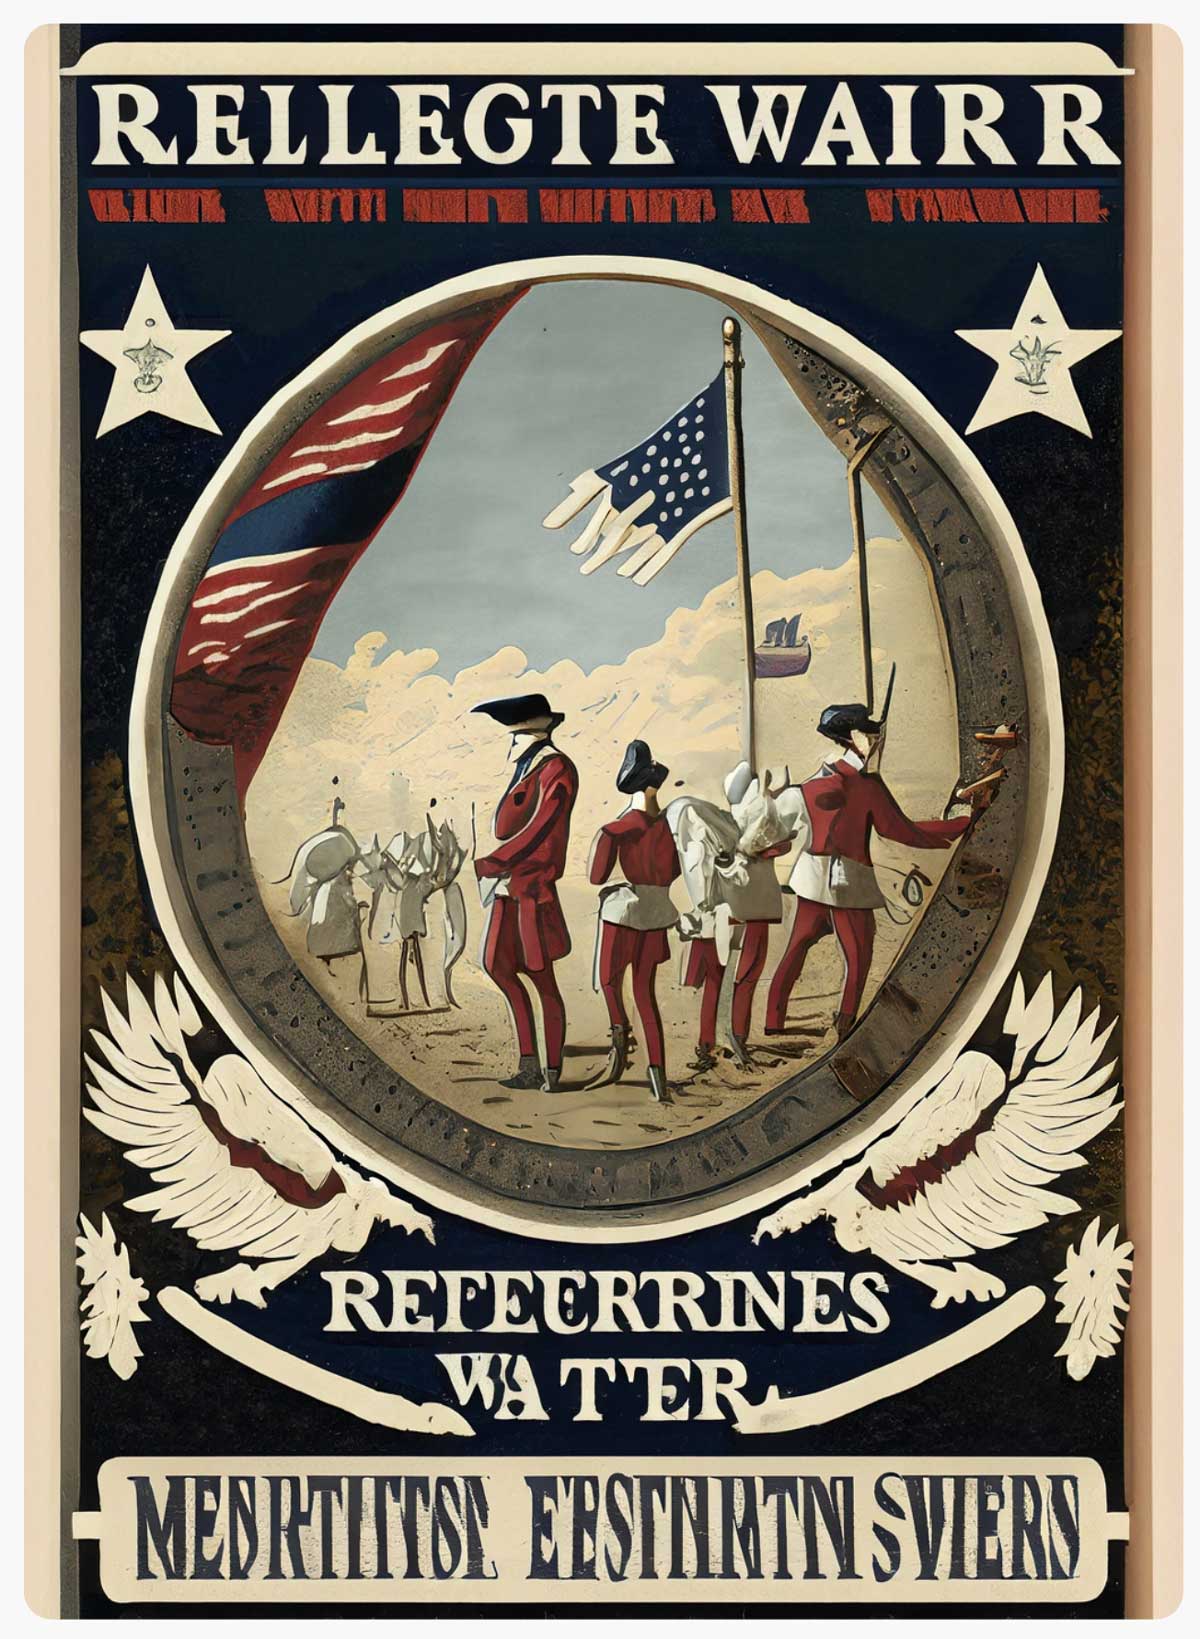 1776 Poster